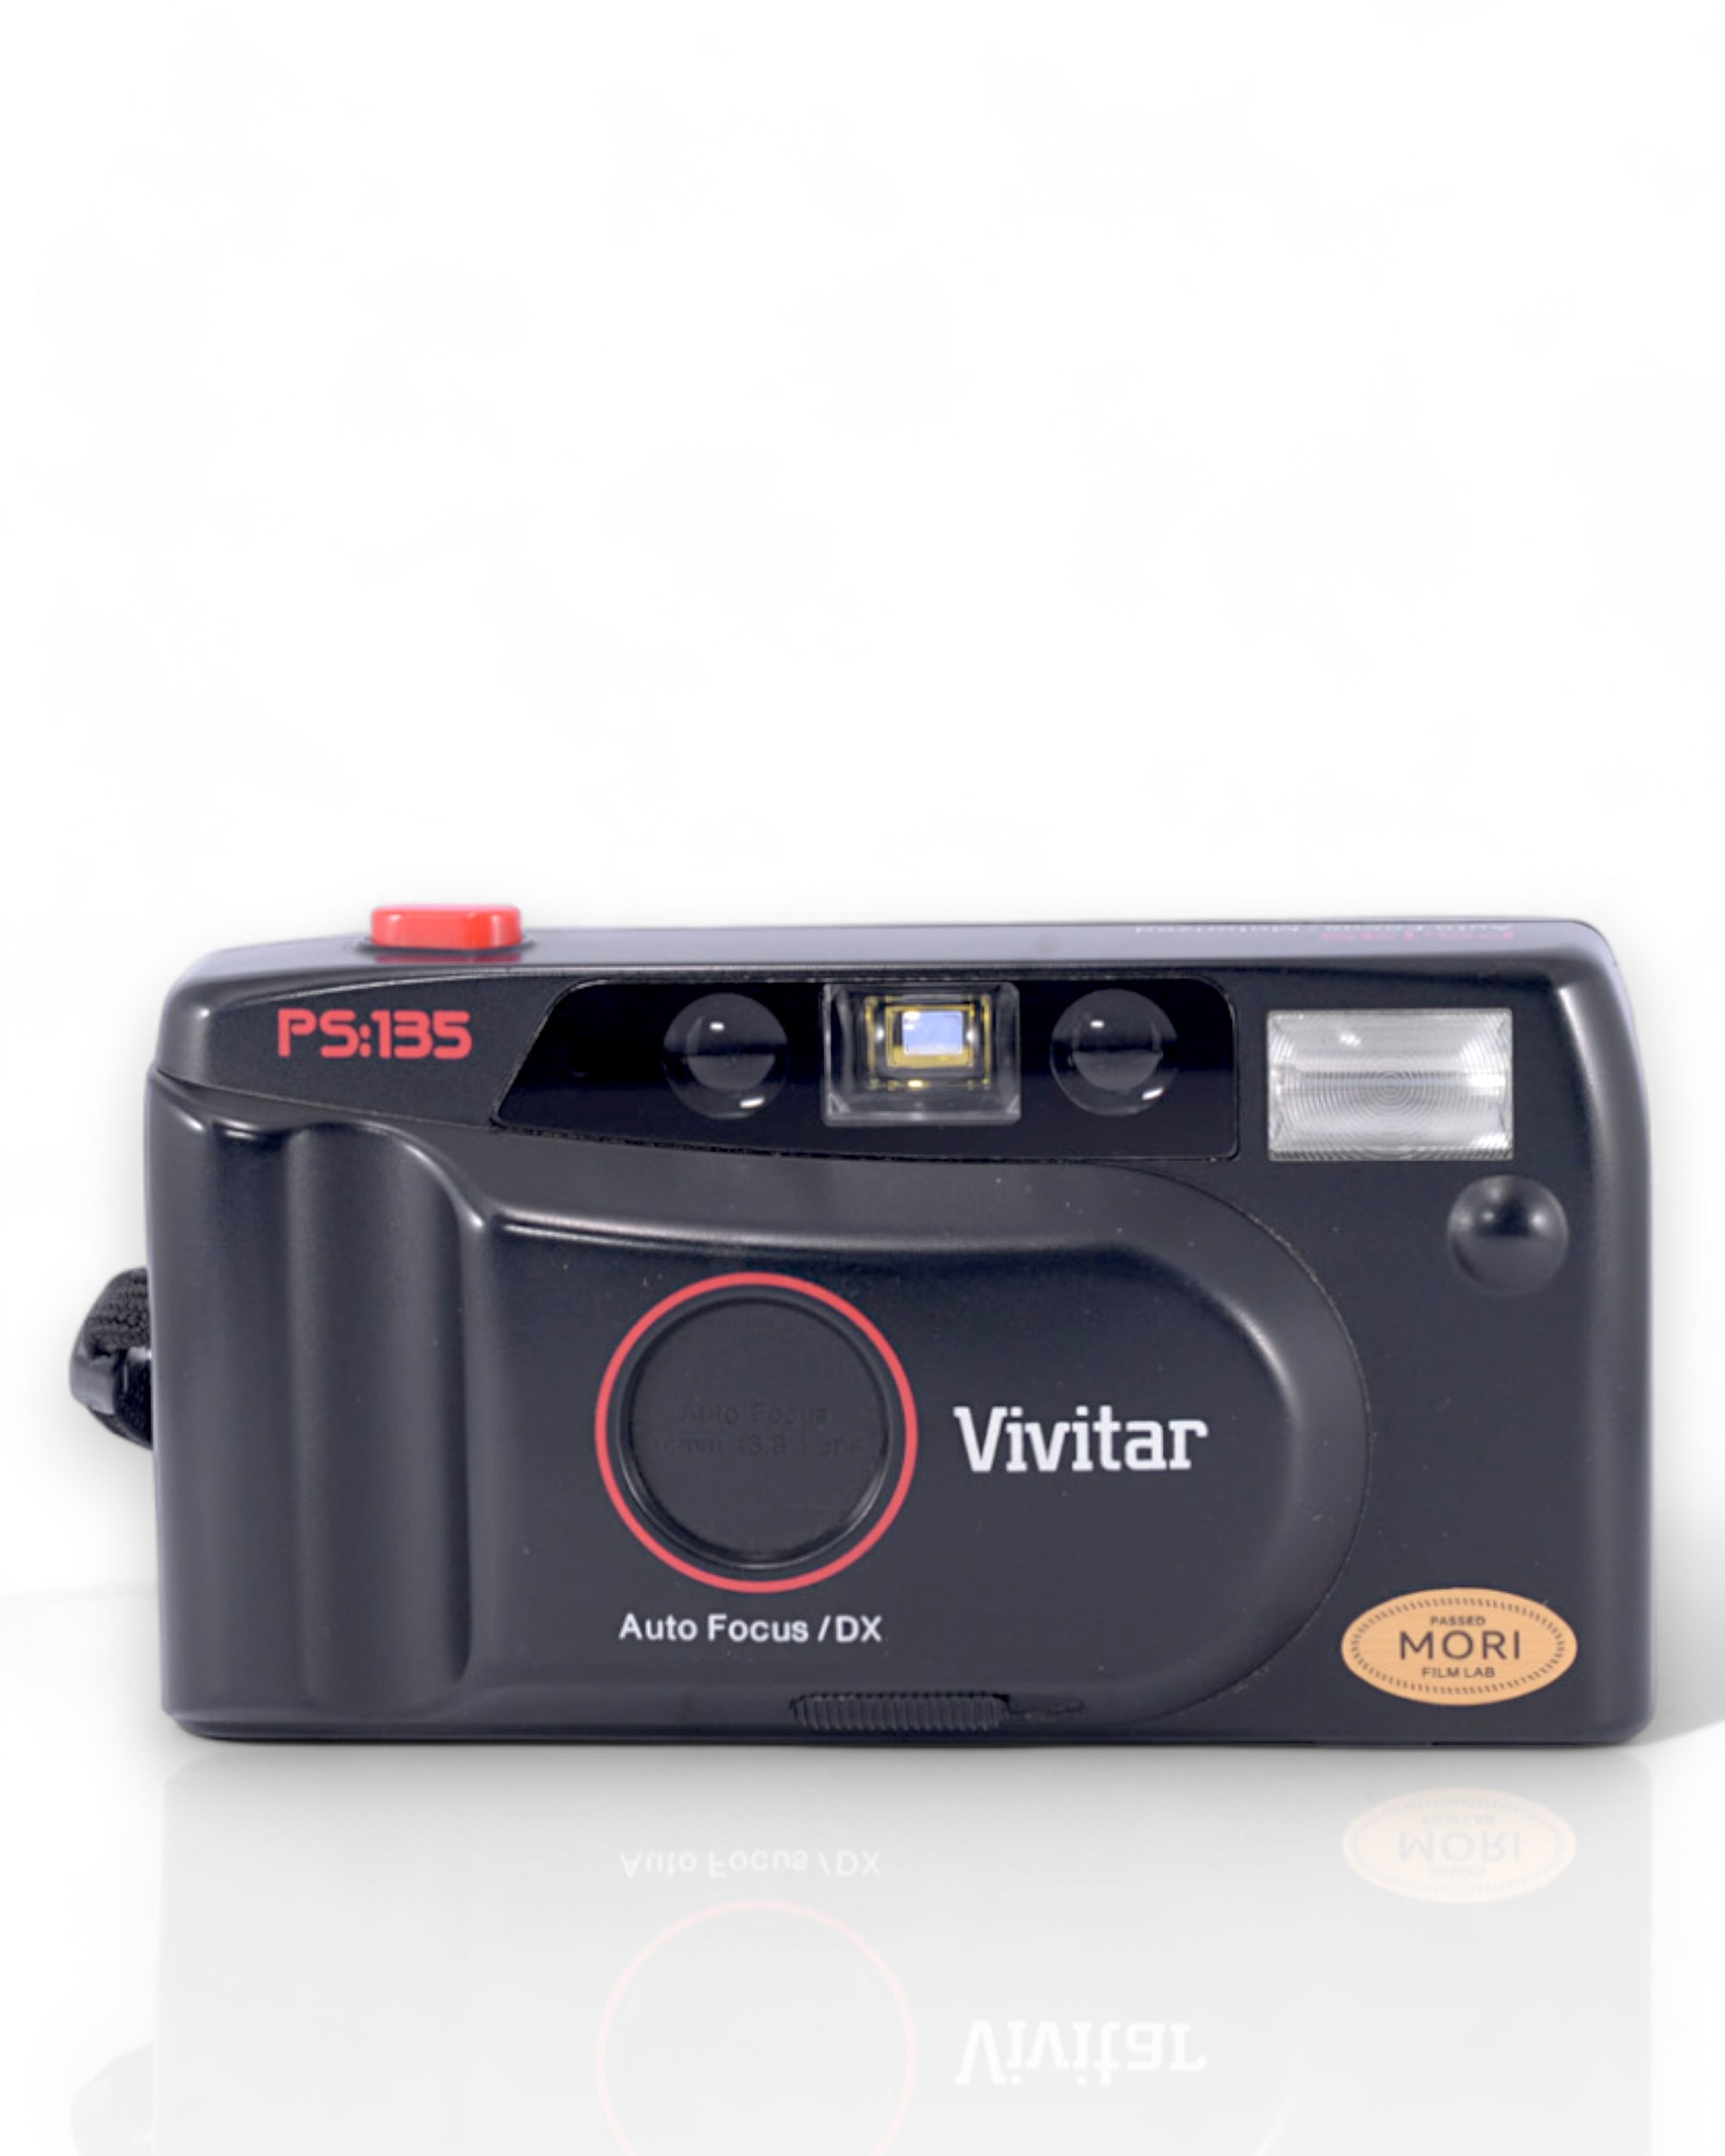 Vivitar PS135 35mm Point & Shoot film camera with 35mm zoom lens